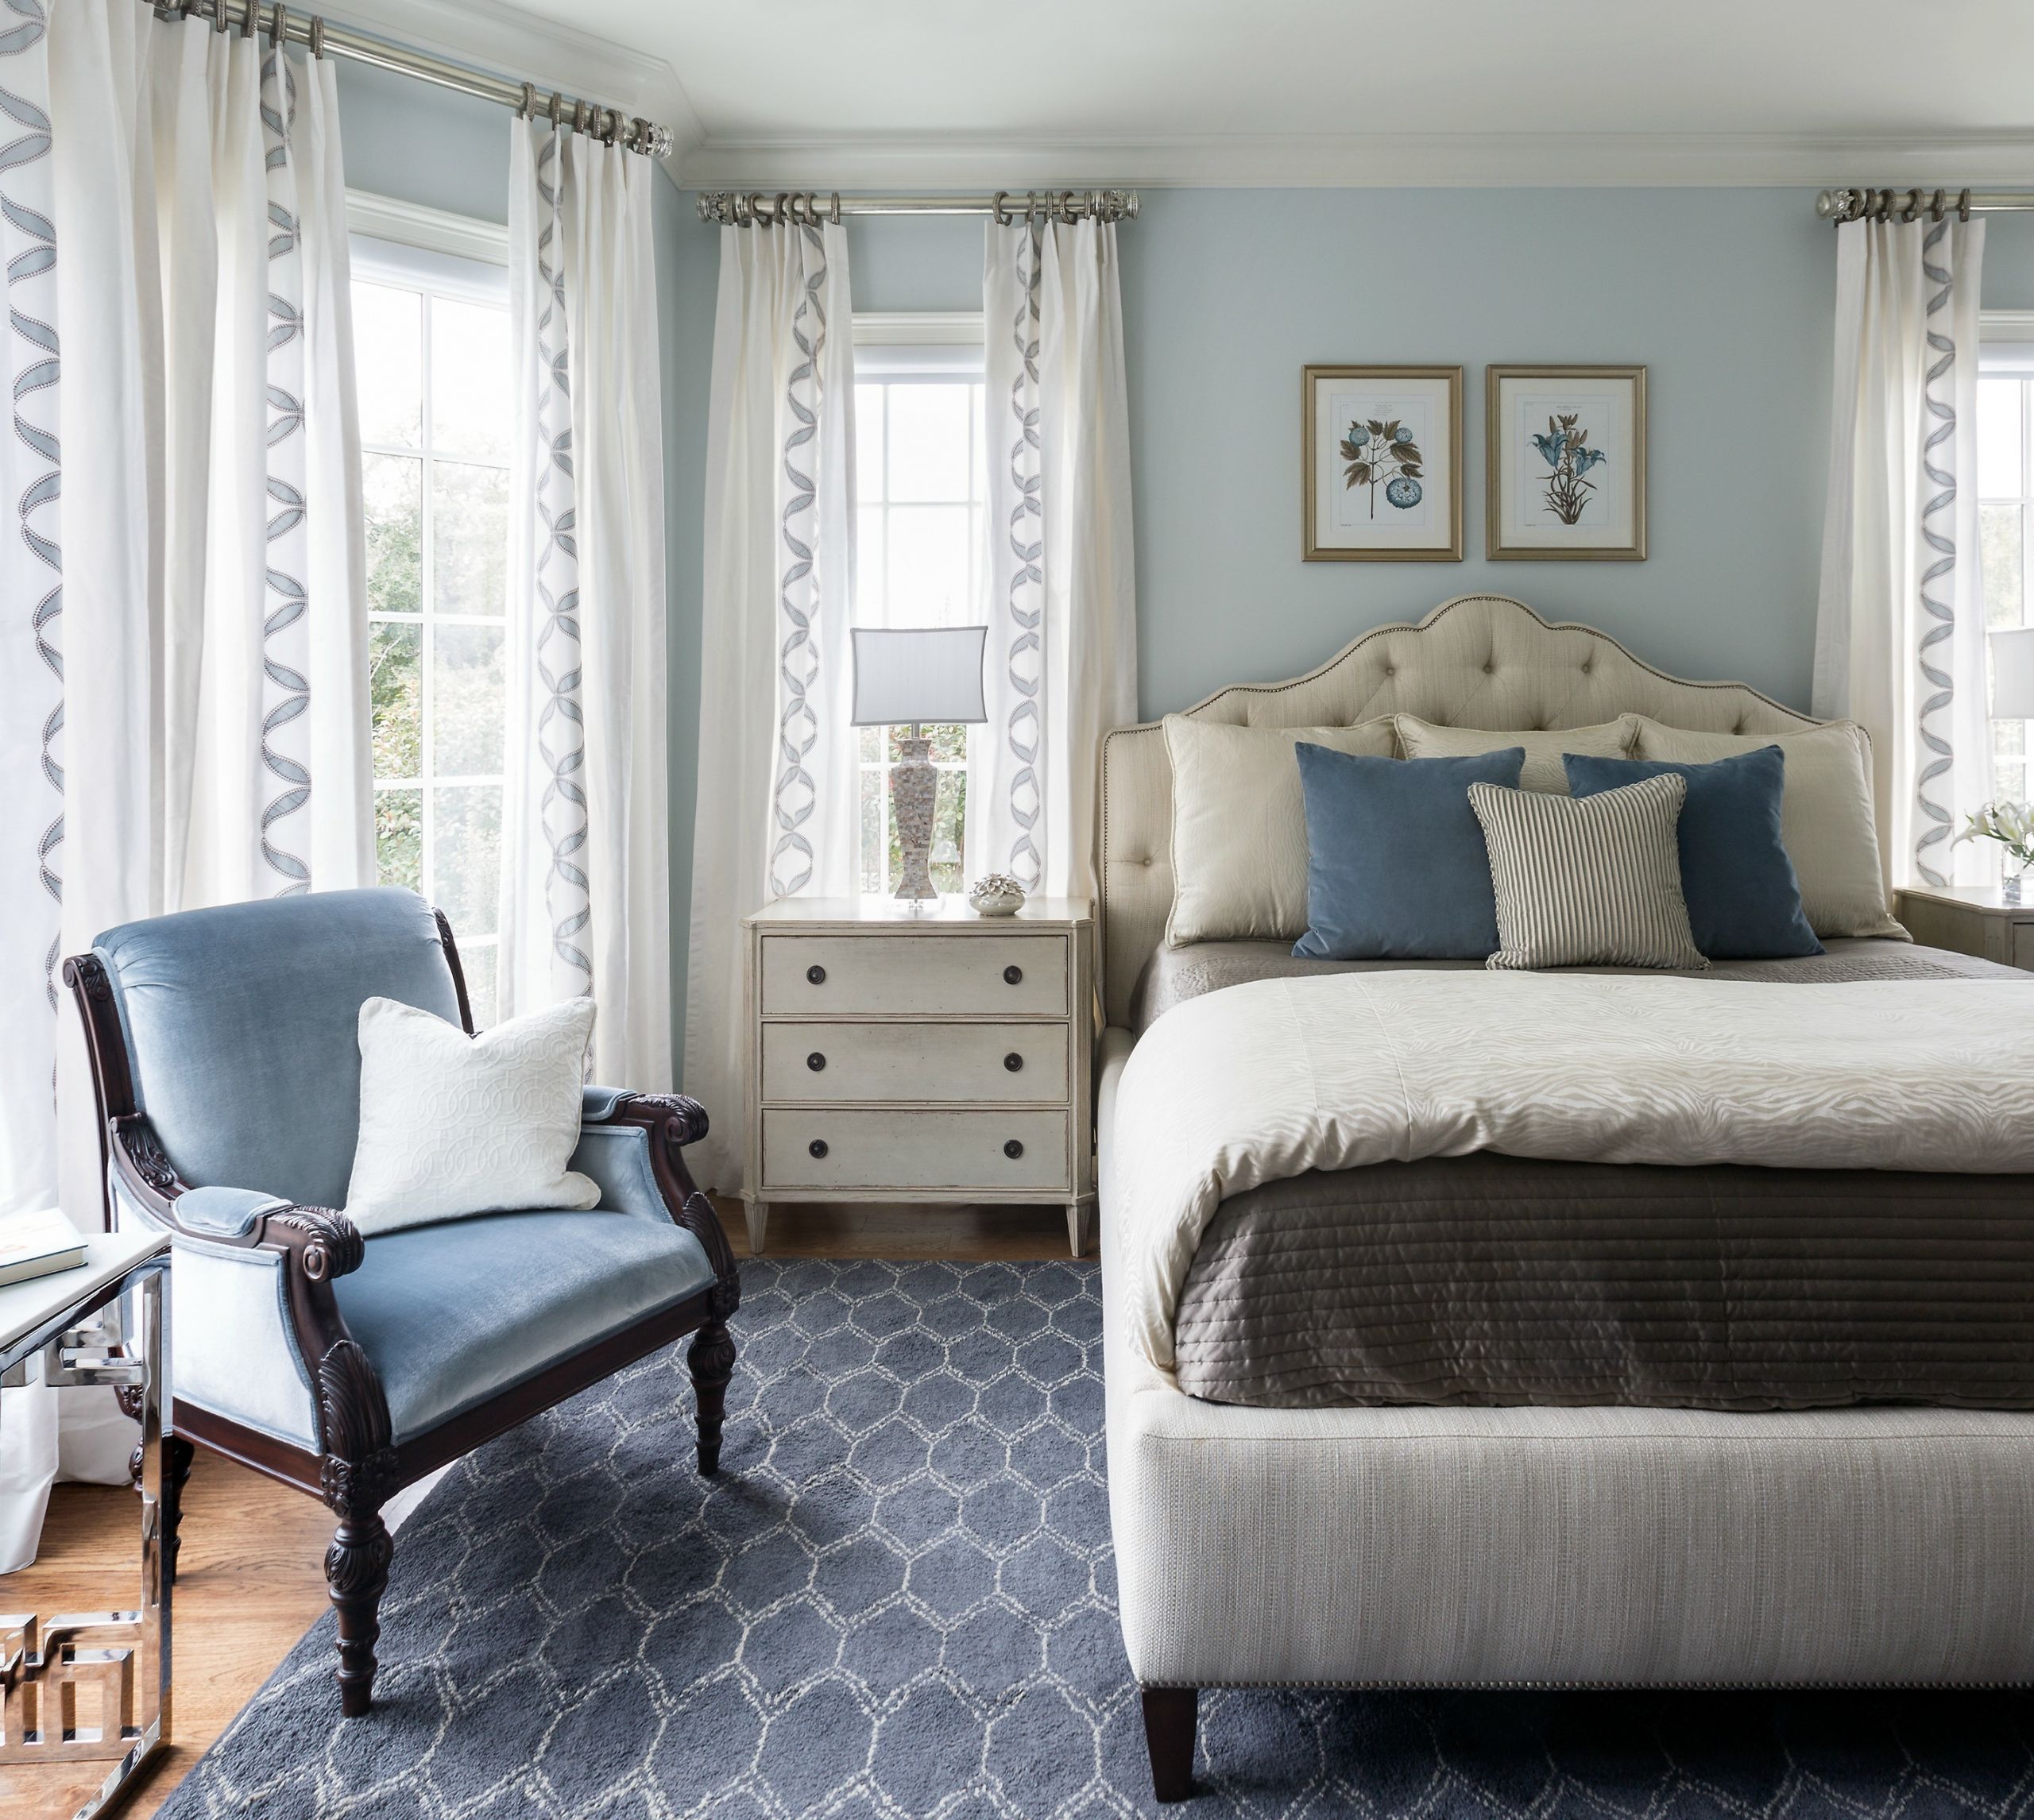 Blue Paint Colors For Bedroom
 Bedroom Paint Color Trends for 2017